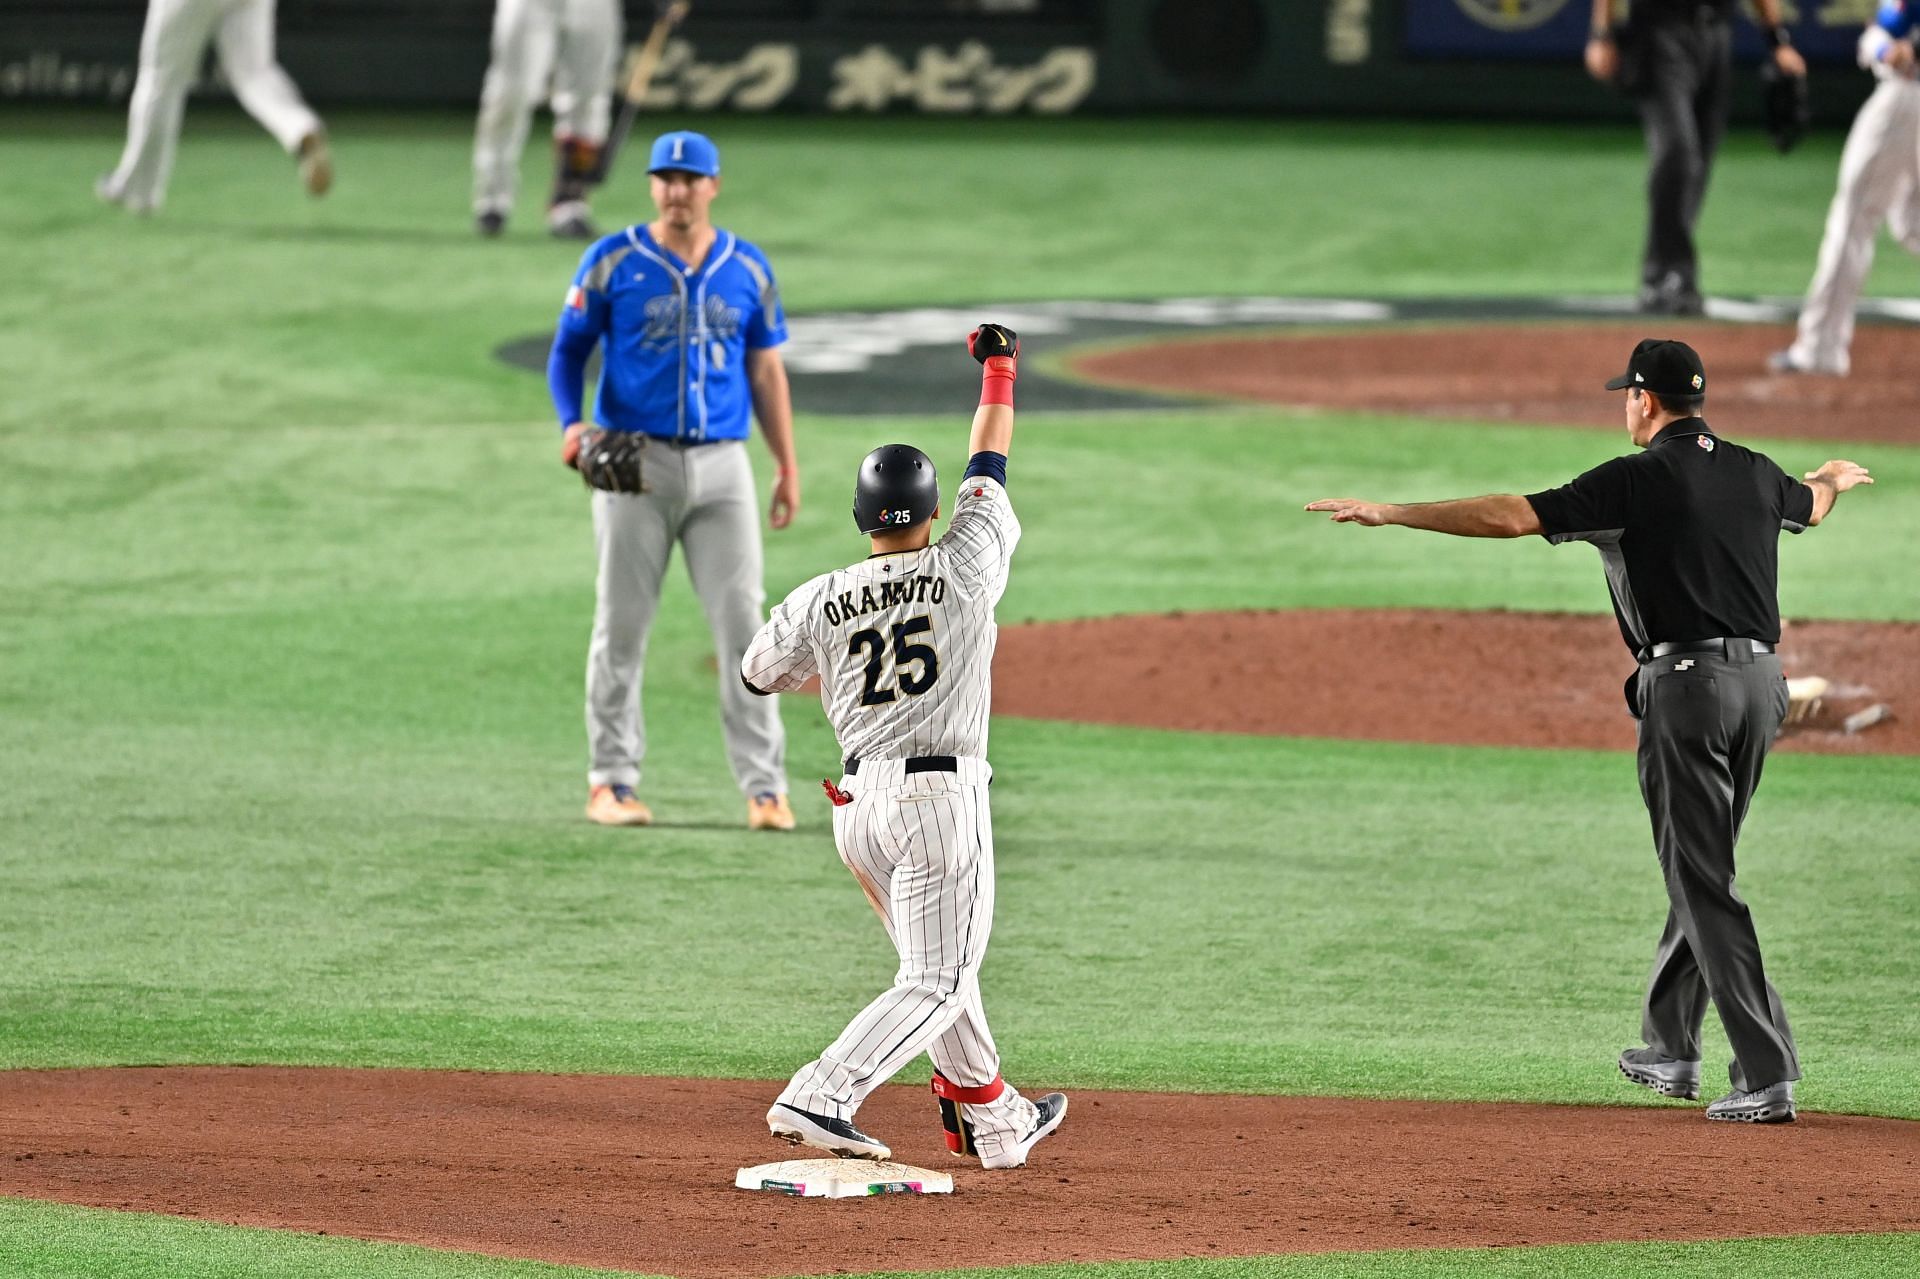 World Baseball Classic on X: Undefeated Team Japan secures its 3rd  #WorldBaseballClassic title!  / X